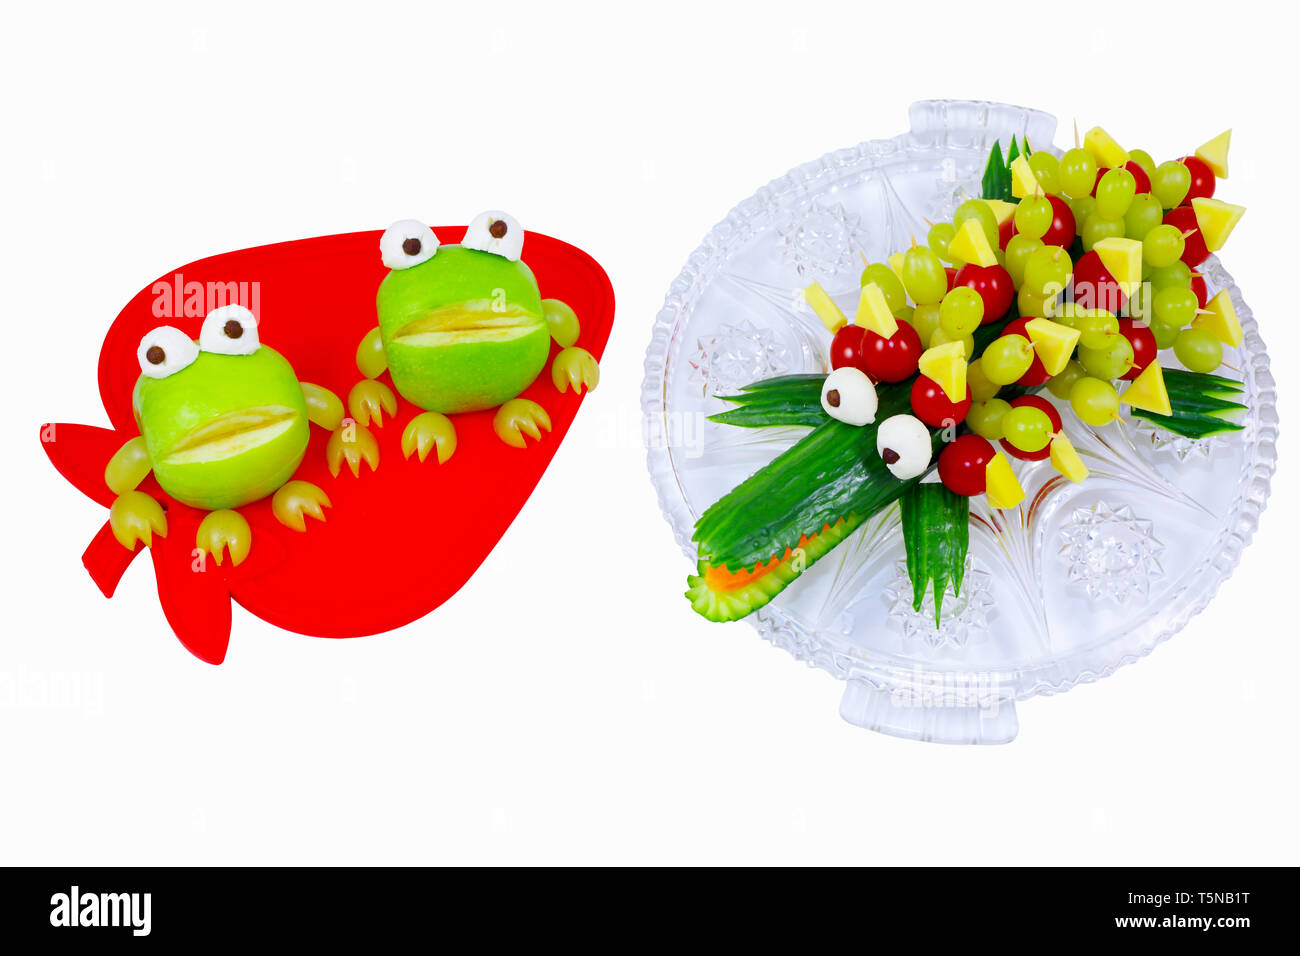 Apple frog and cucumber crokodile. Food carving, Frog and crocodile carved out of vegetables and fruit Stock Photo